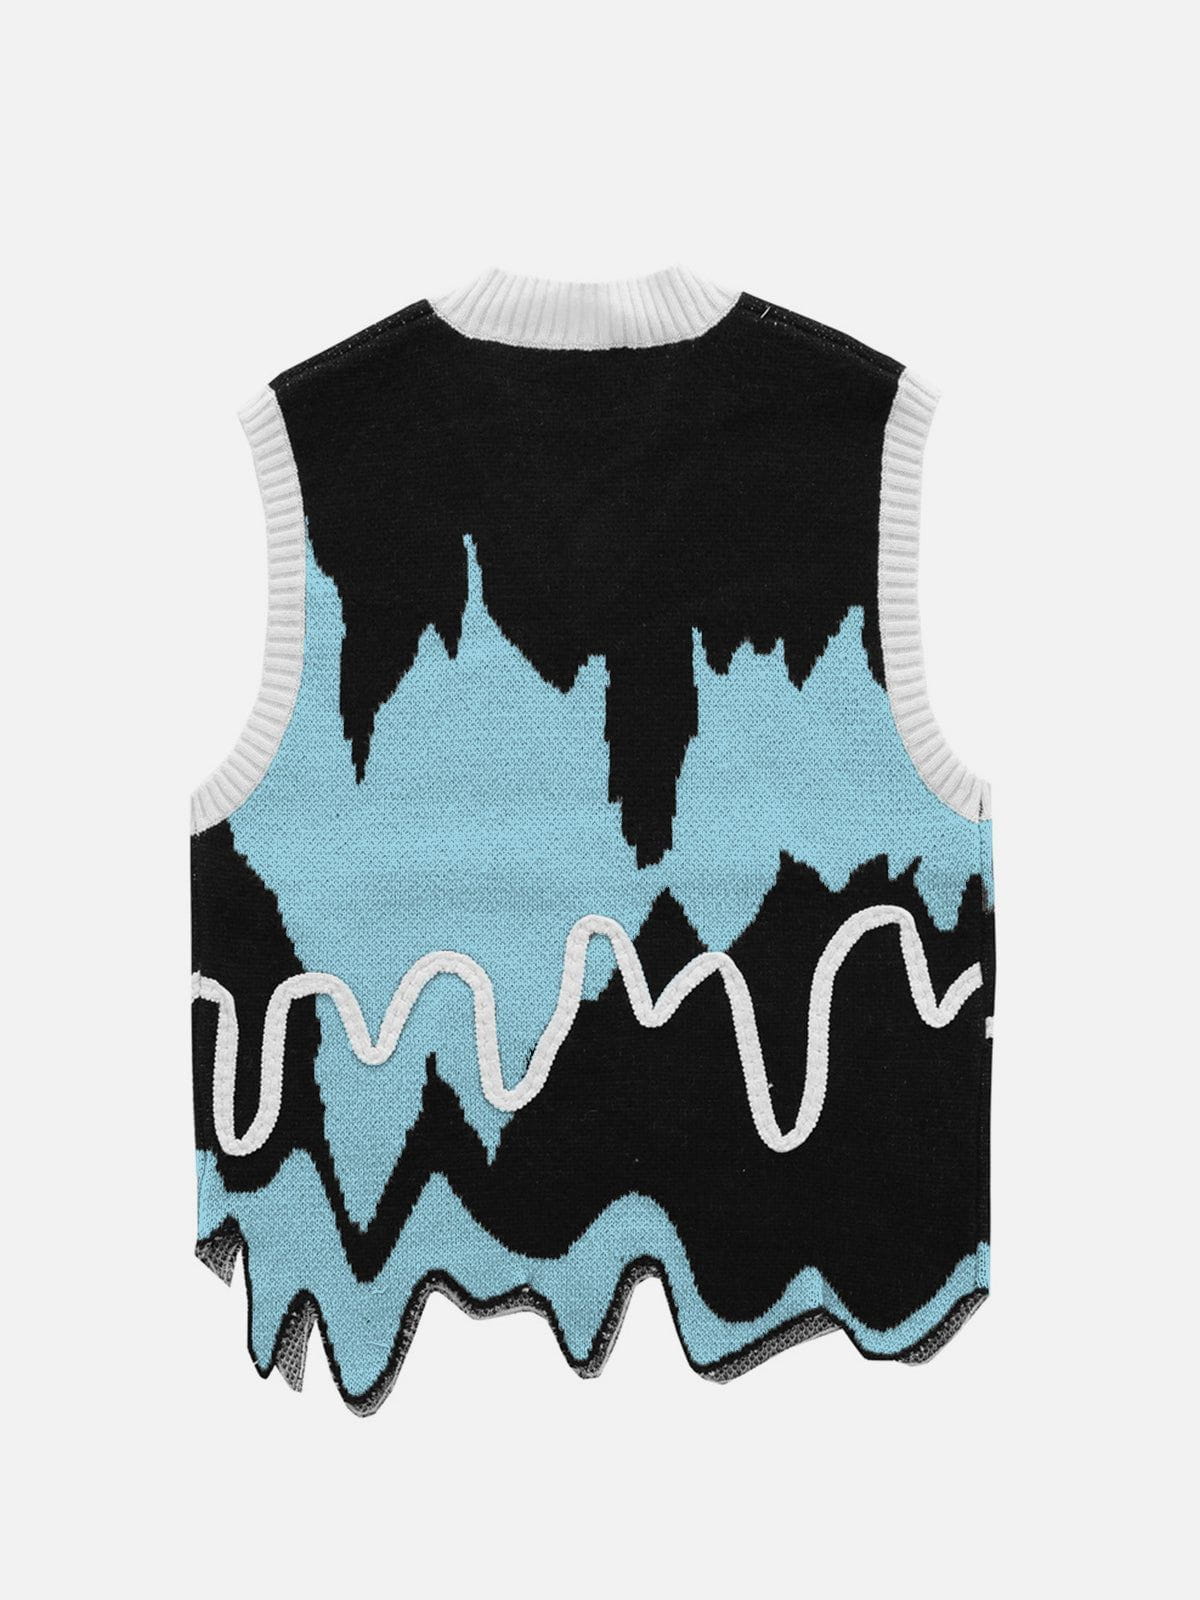 Melted "Ice Cream" Sweater Vest Streetwear Brand Techwear Combat Tactical YUGEN THEORY